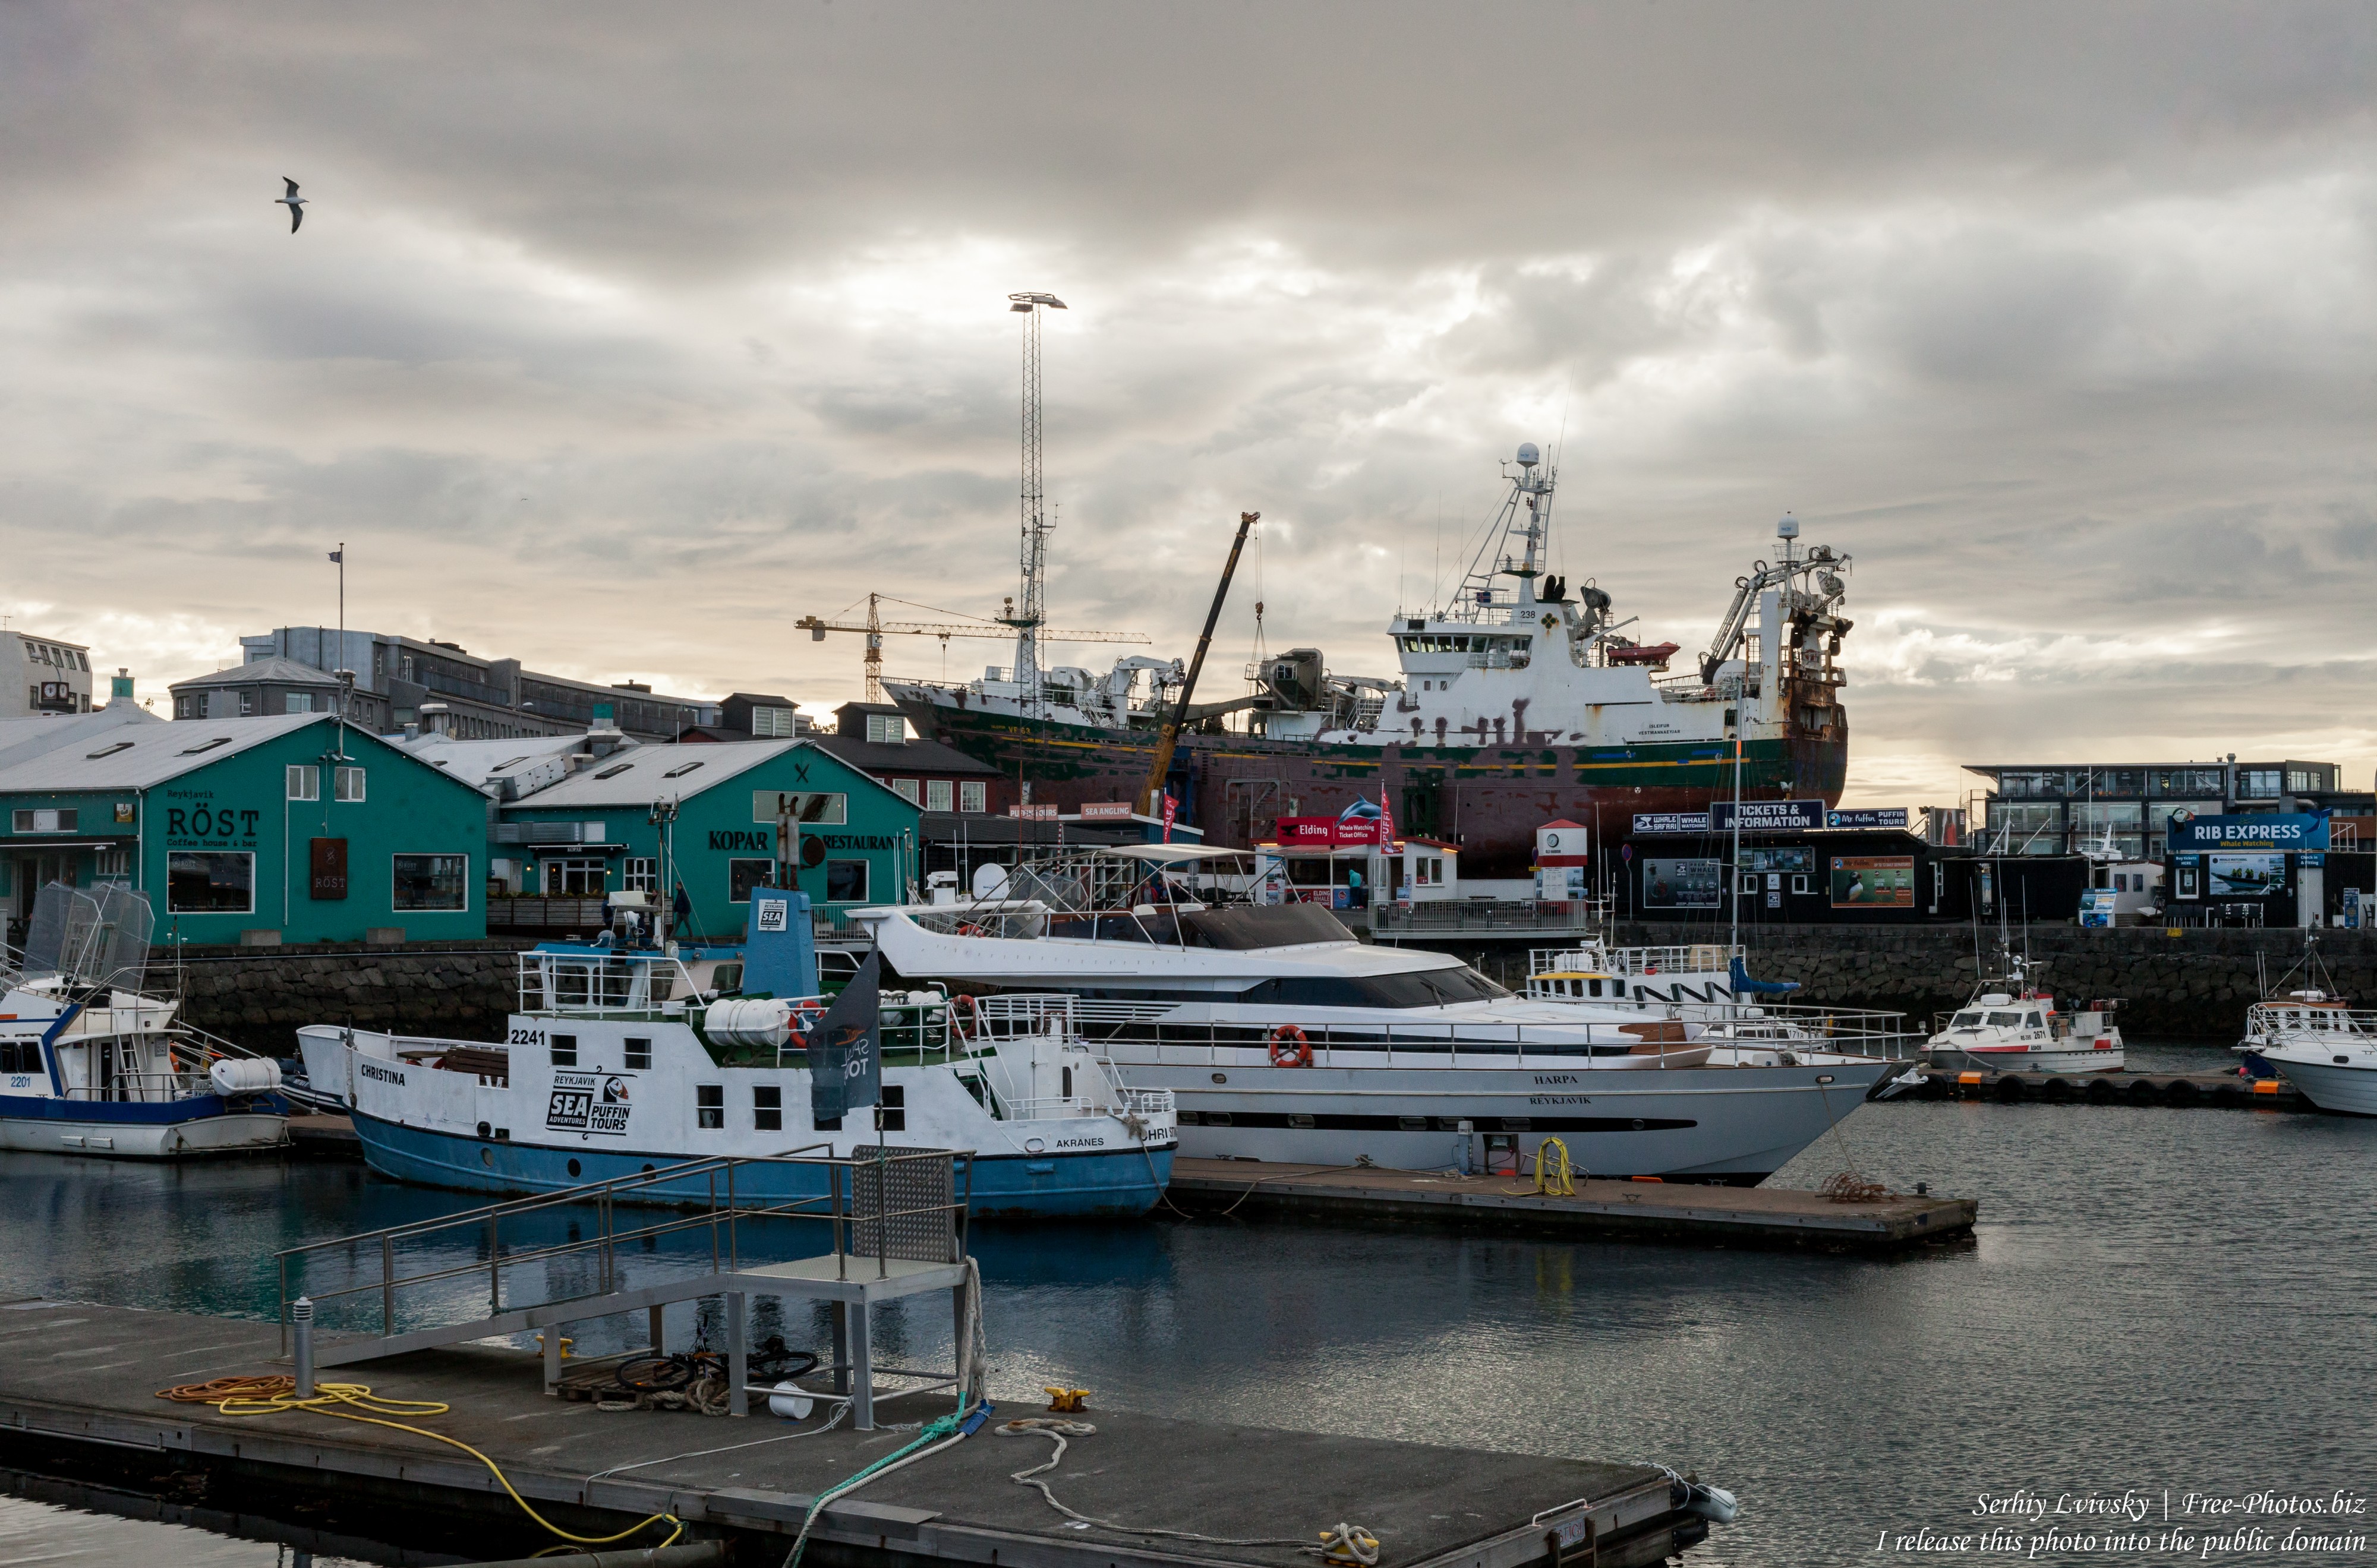 Reykjavik, Iceland, photographed in May 2019 by Serhiy Lvivsky, picture 66